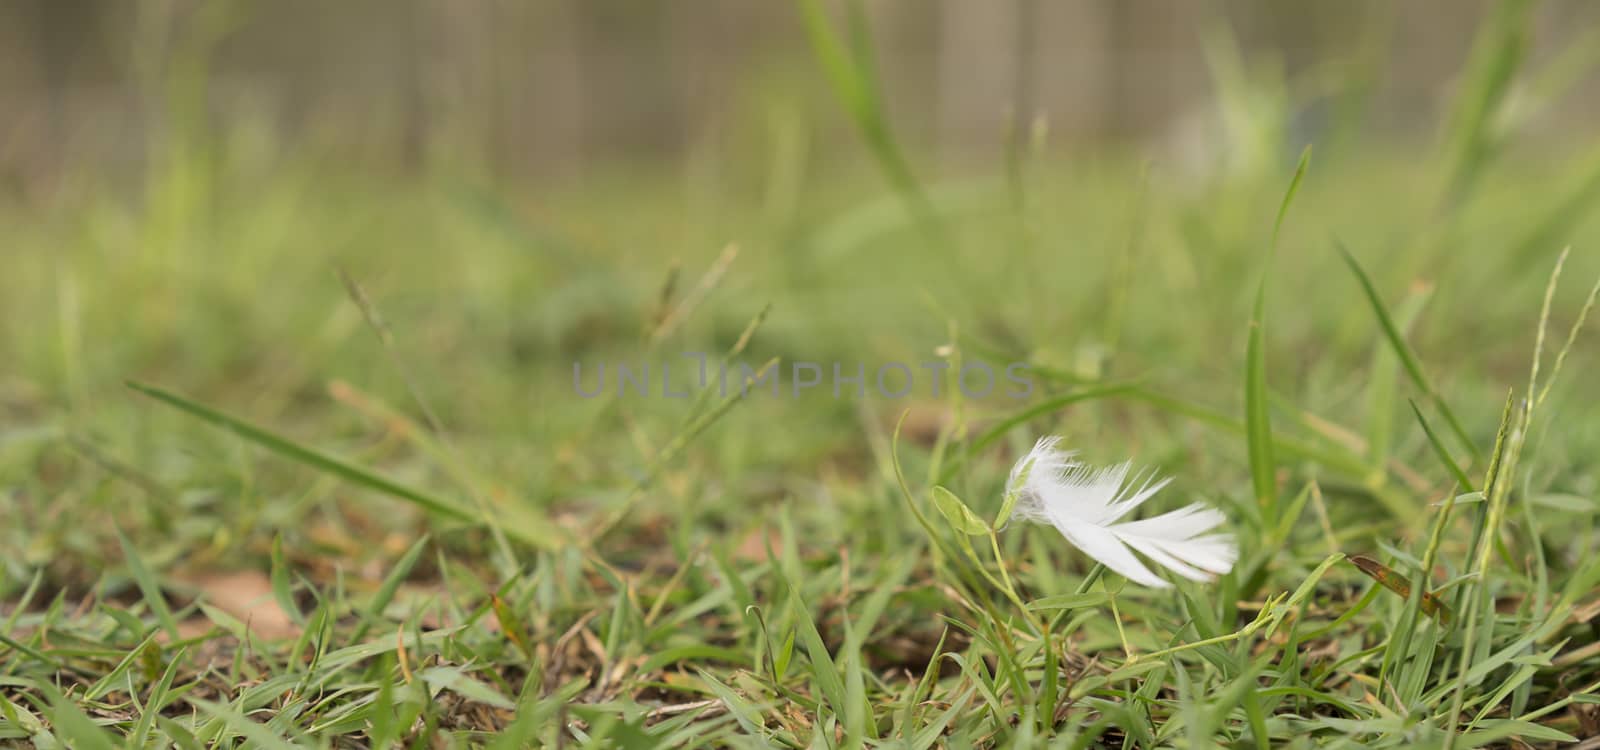 White Downy Feather Blowing in Wind by sherj